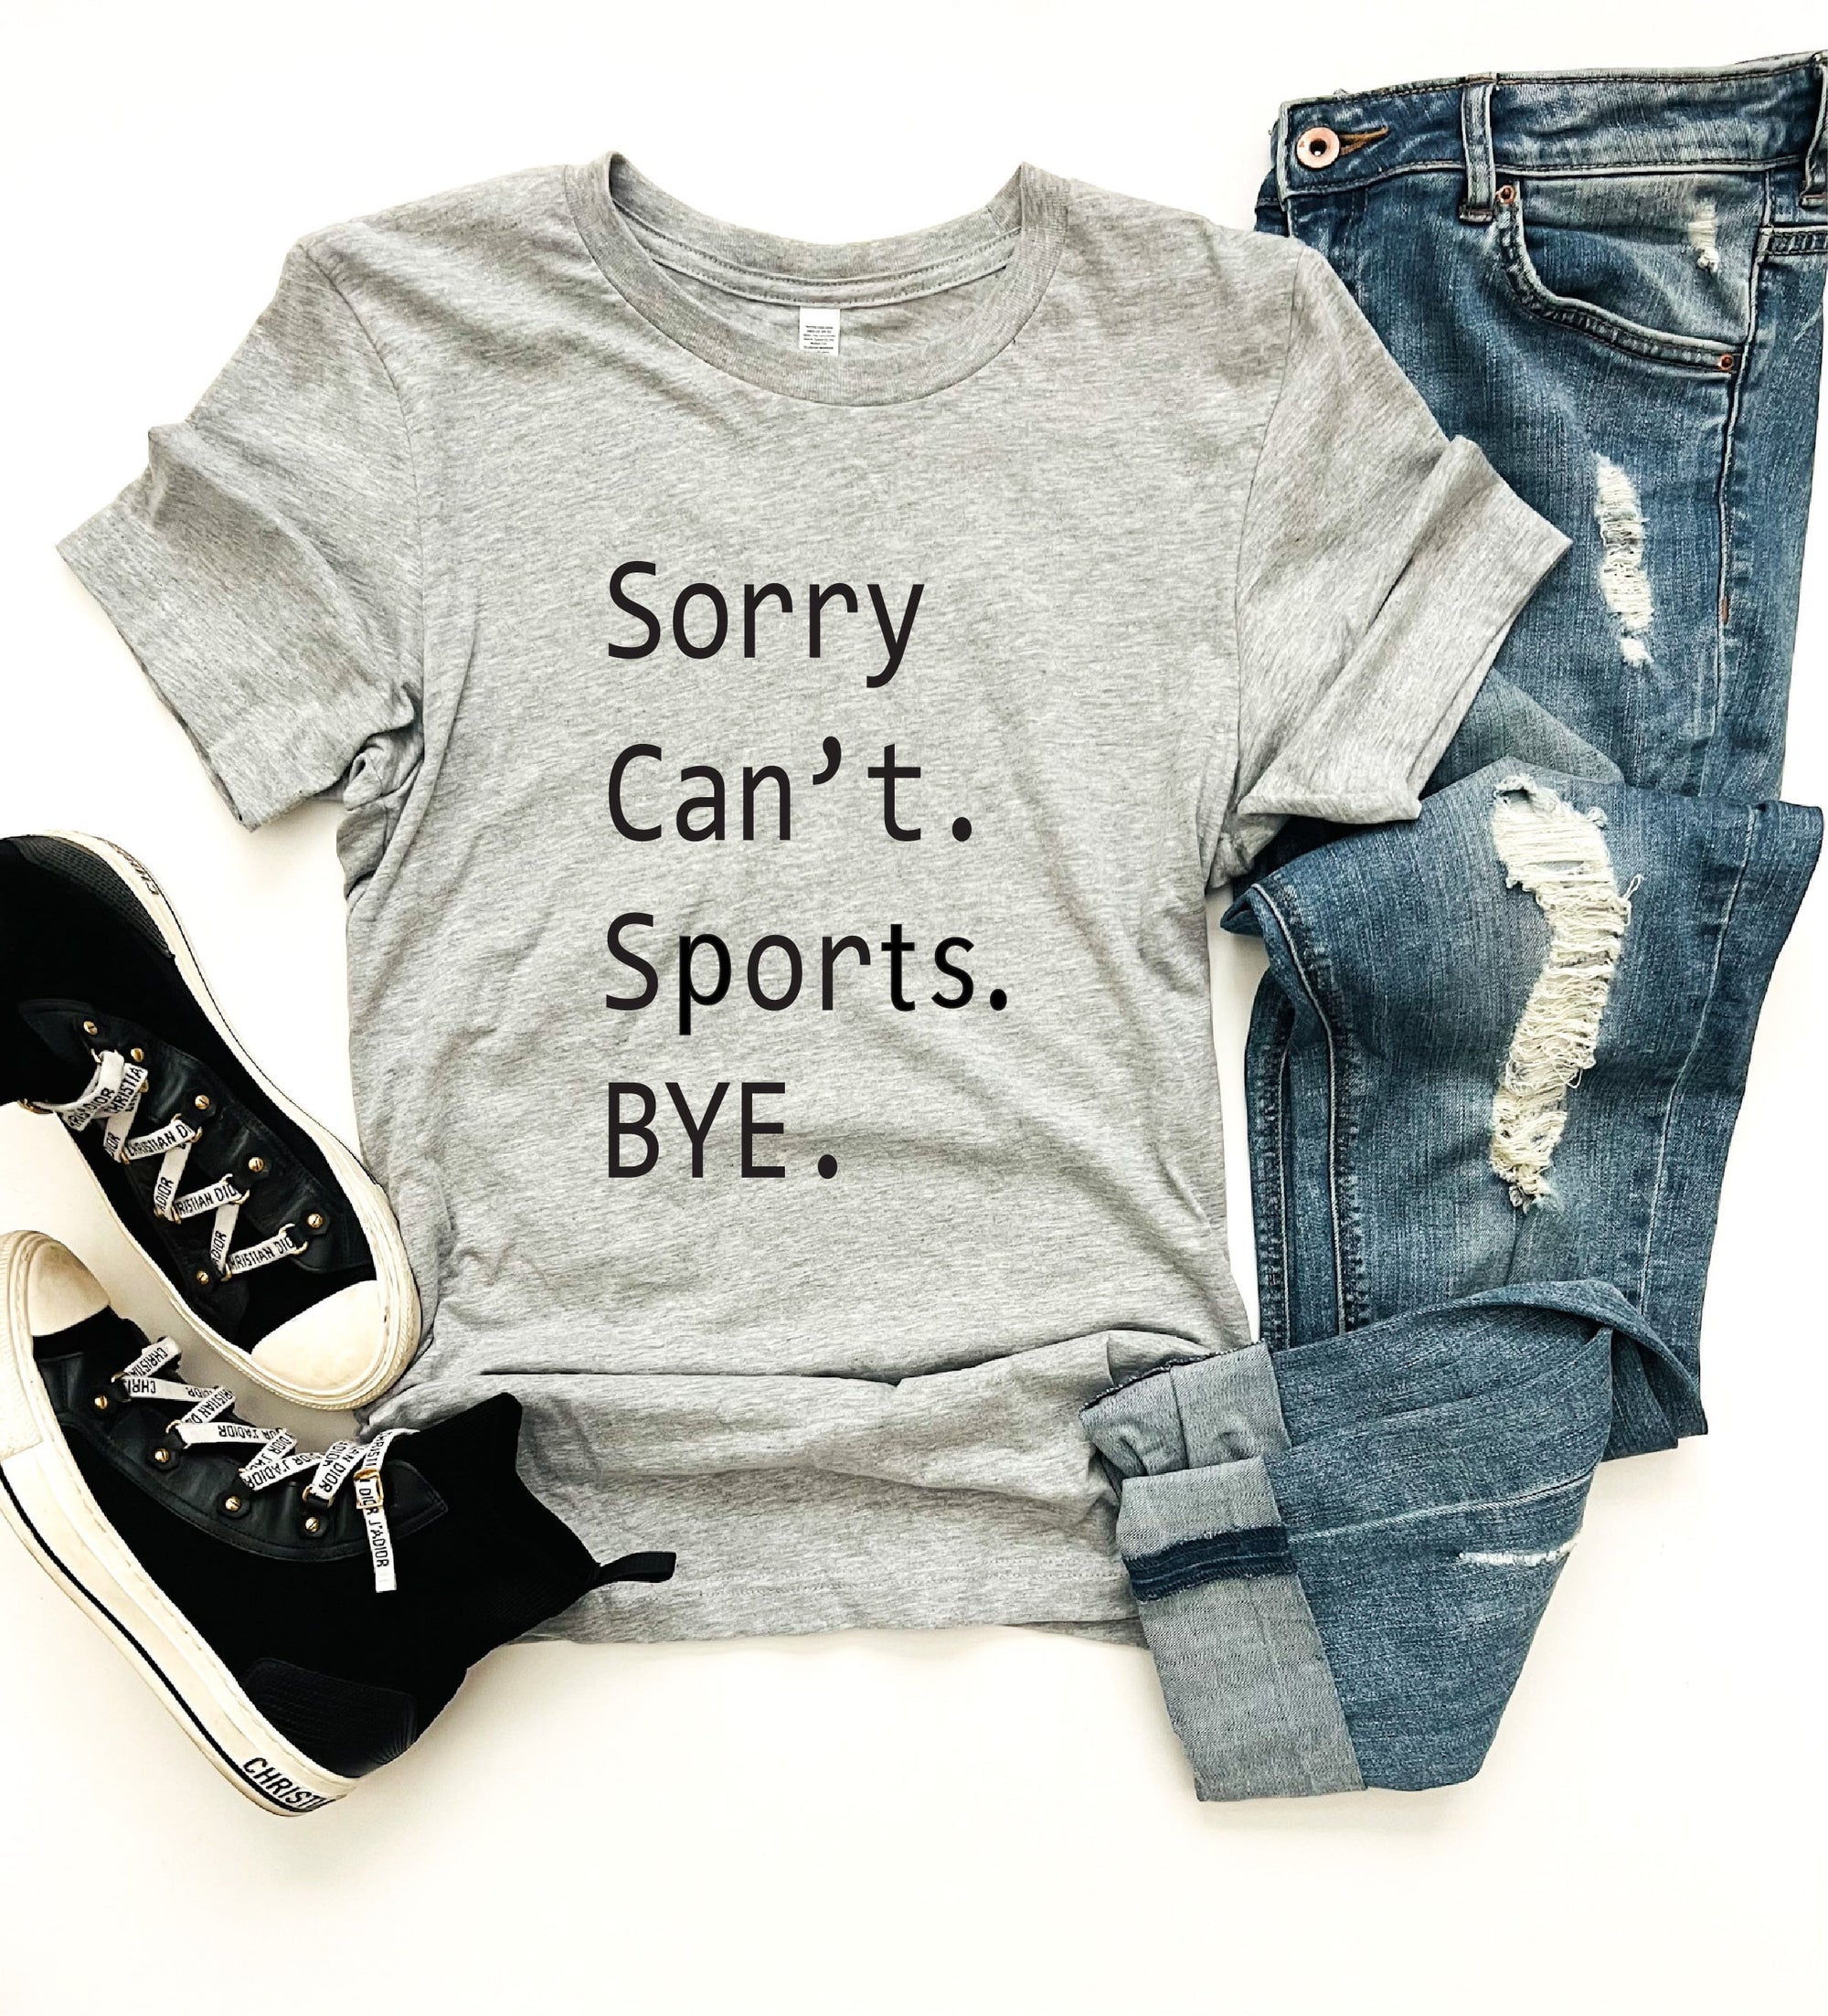 Sorry can't sports tee Short sleeve sports tee Bella Canvas 3001 athletic Heather 